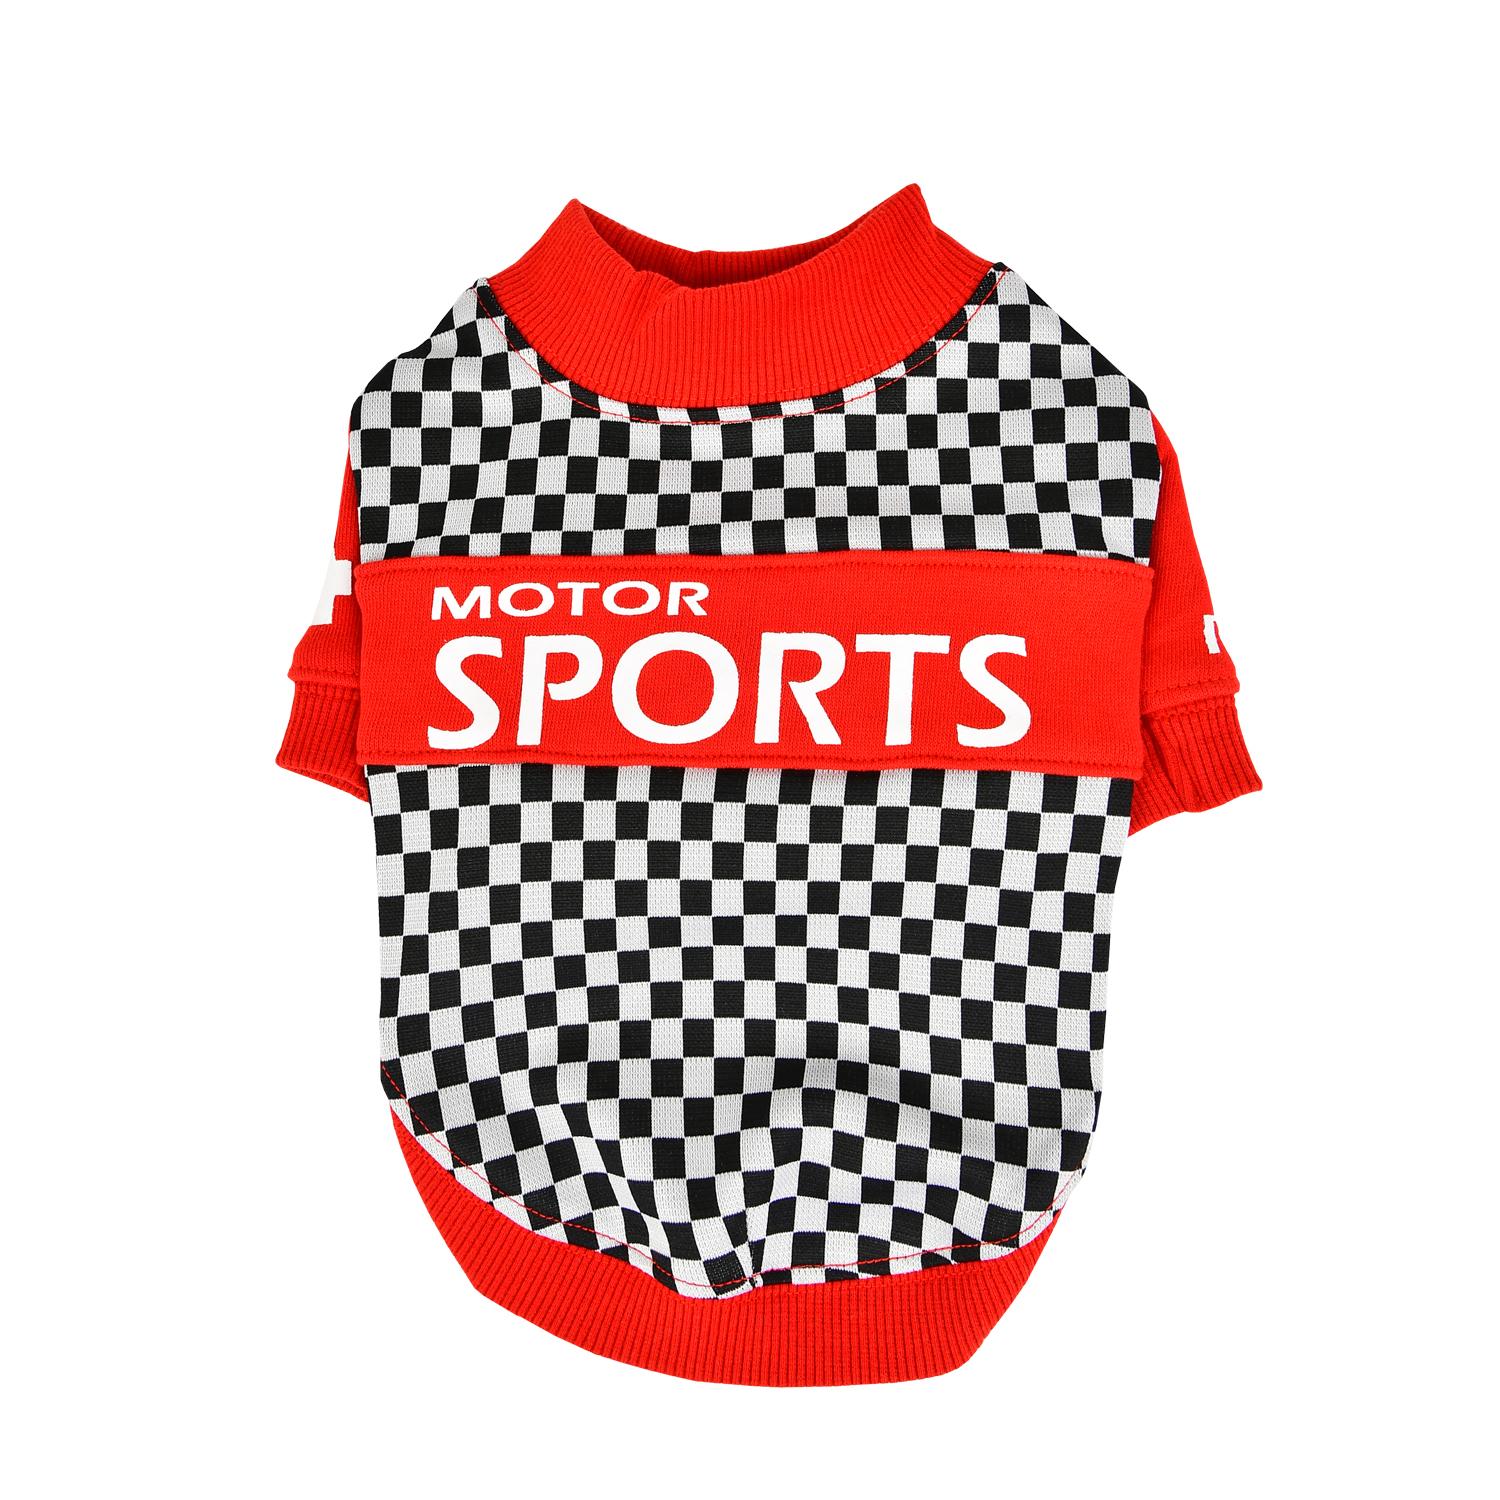 Racer Dog Shirt by Puppia - Red